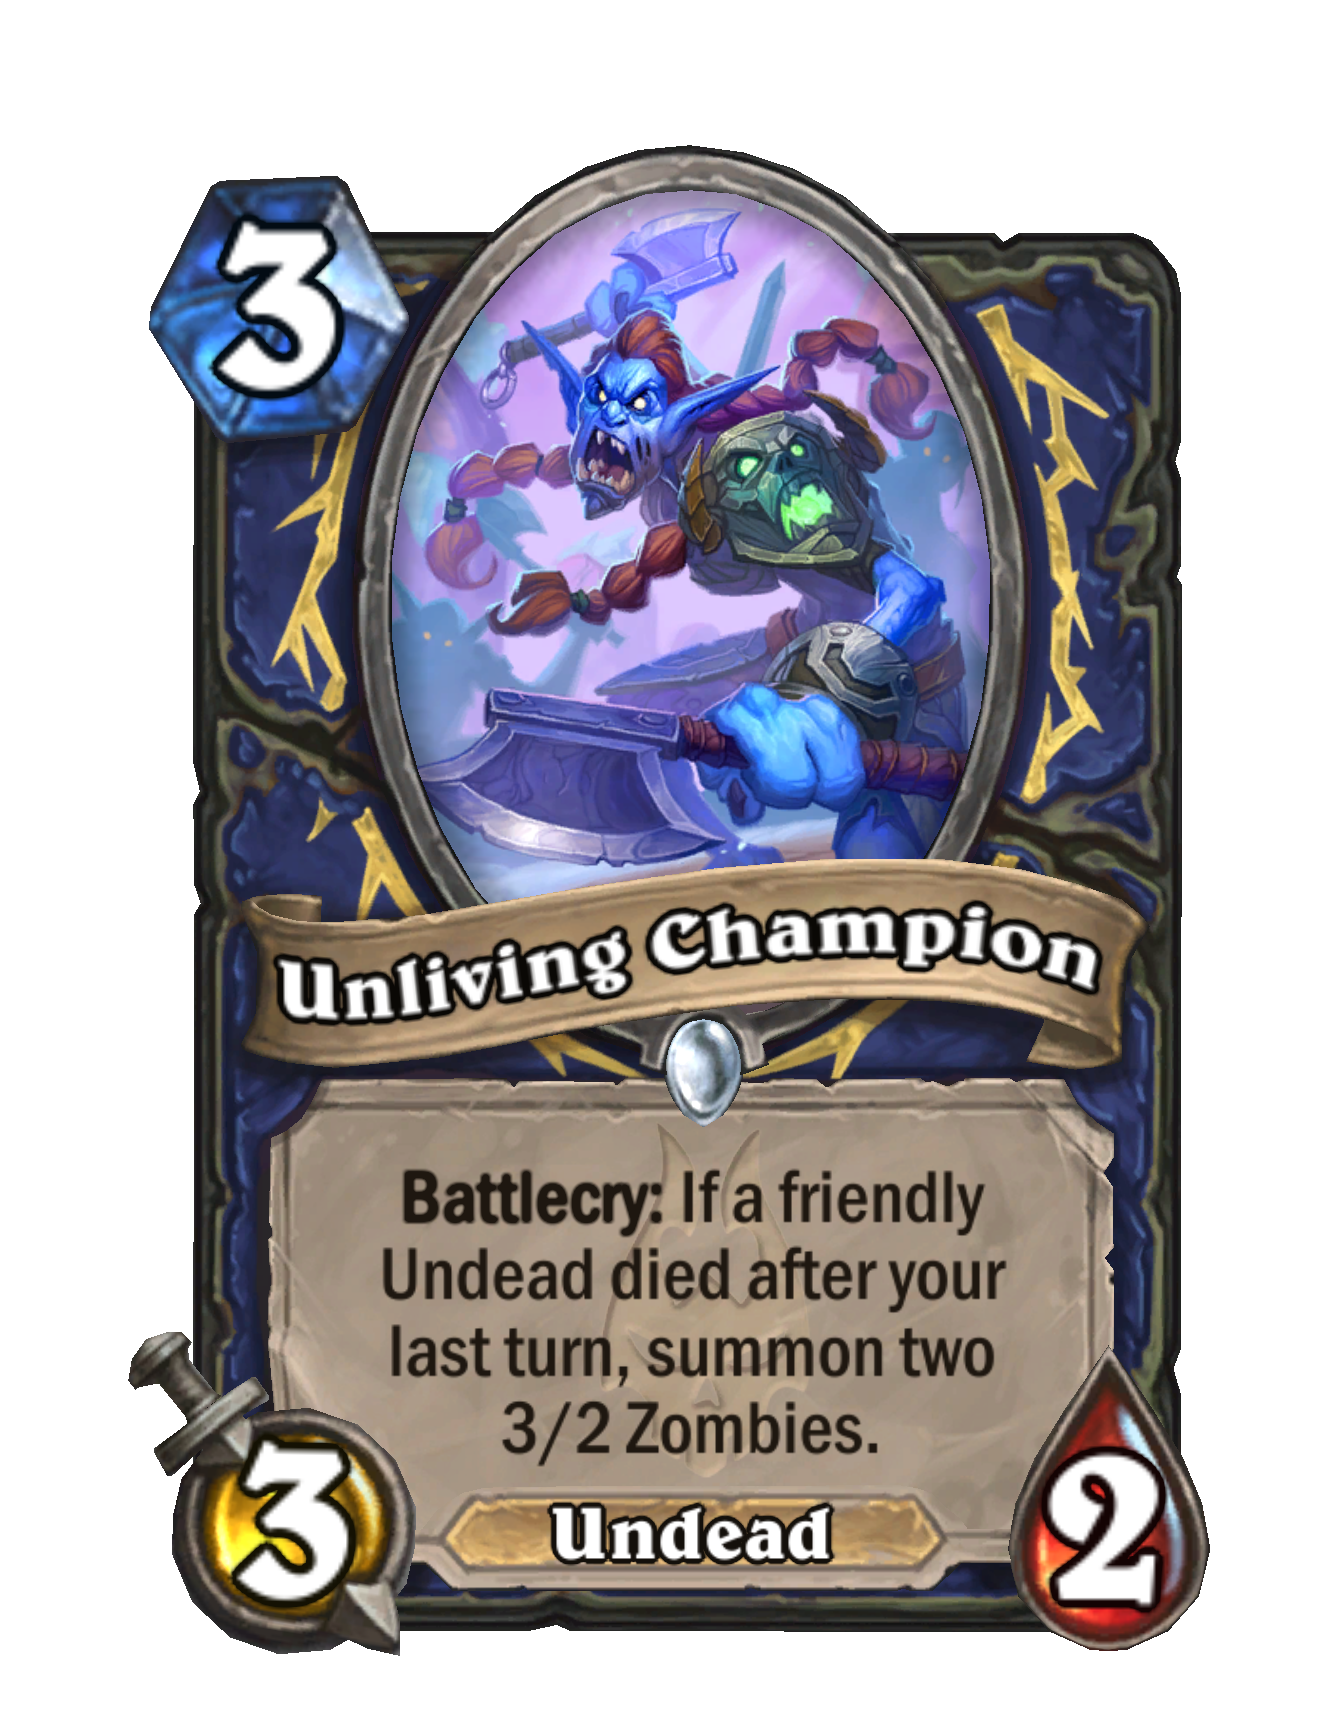 From one of my recent games: The Immortal Champion : r/hearthstone